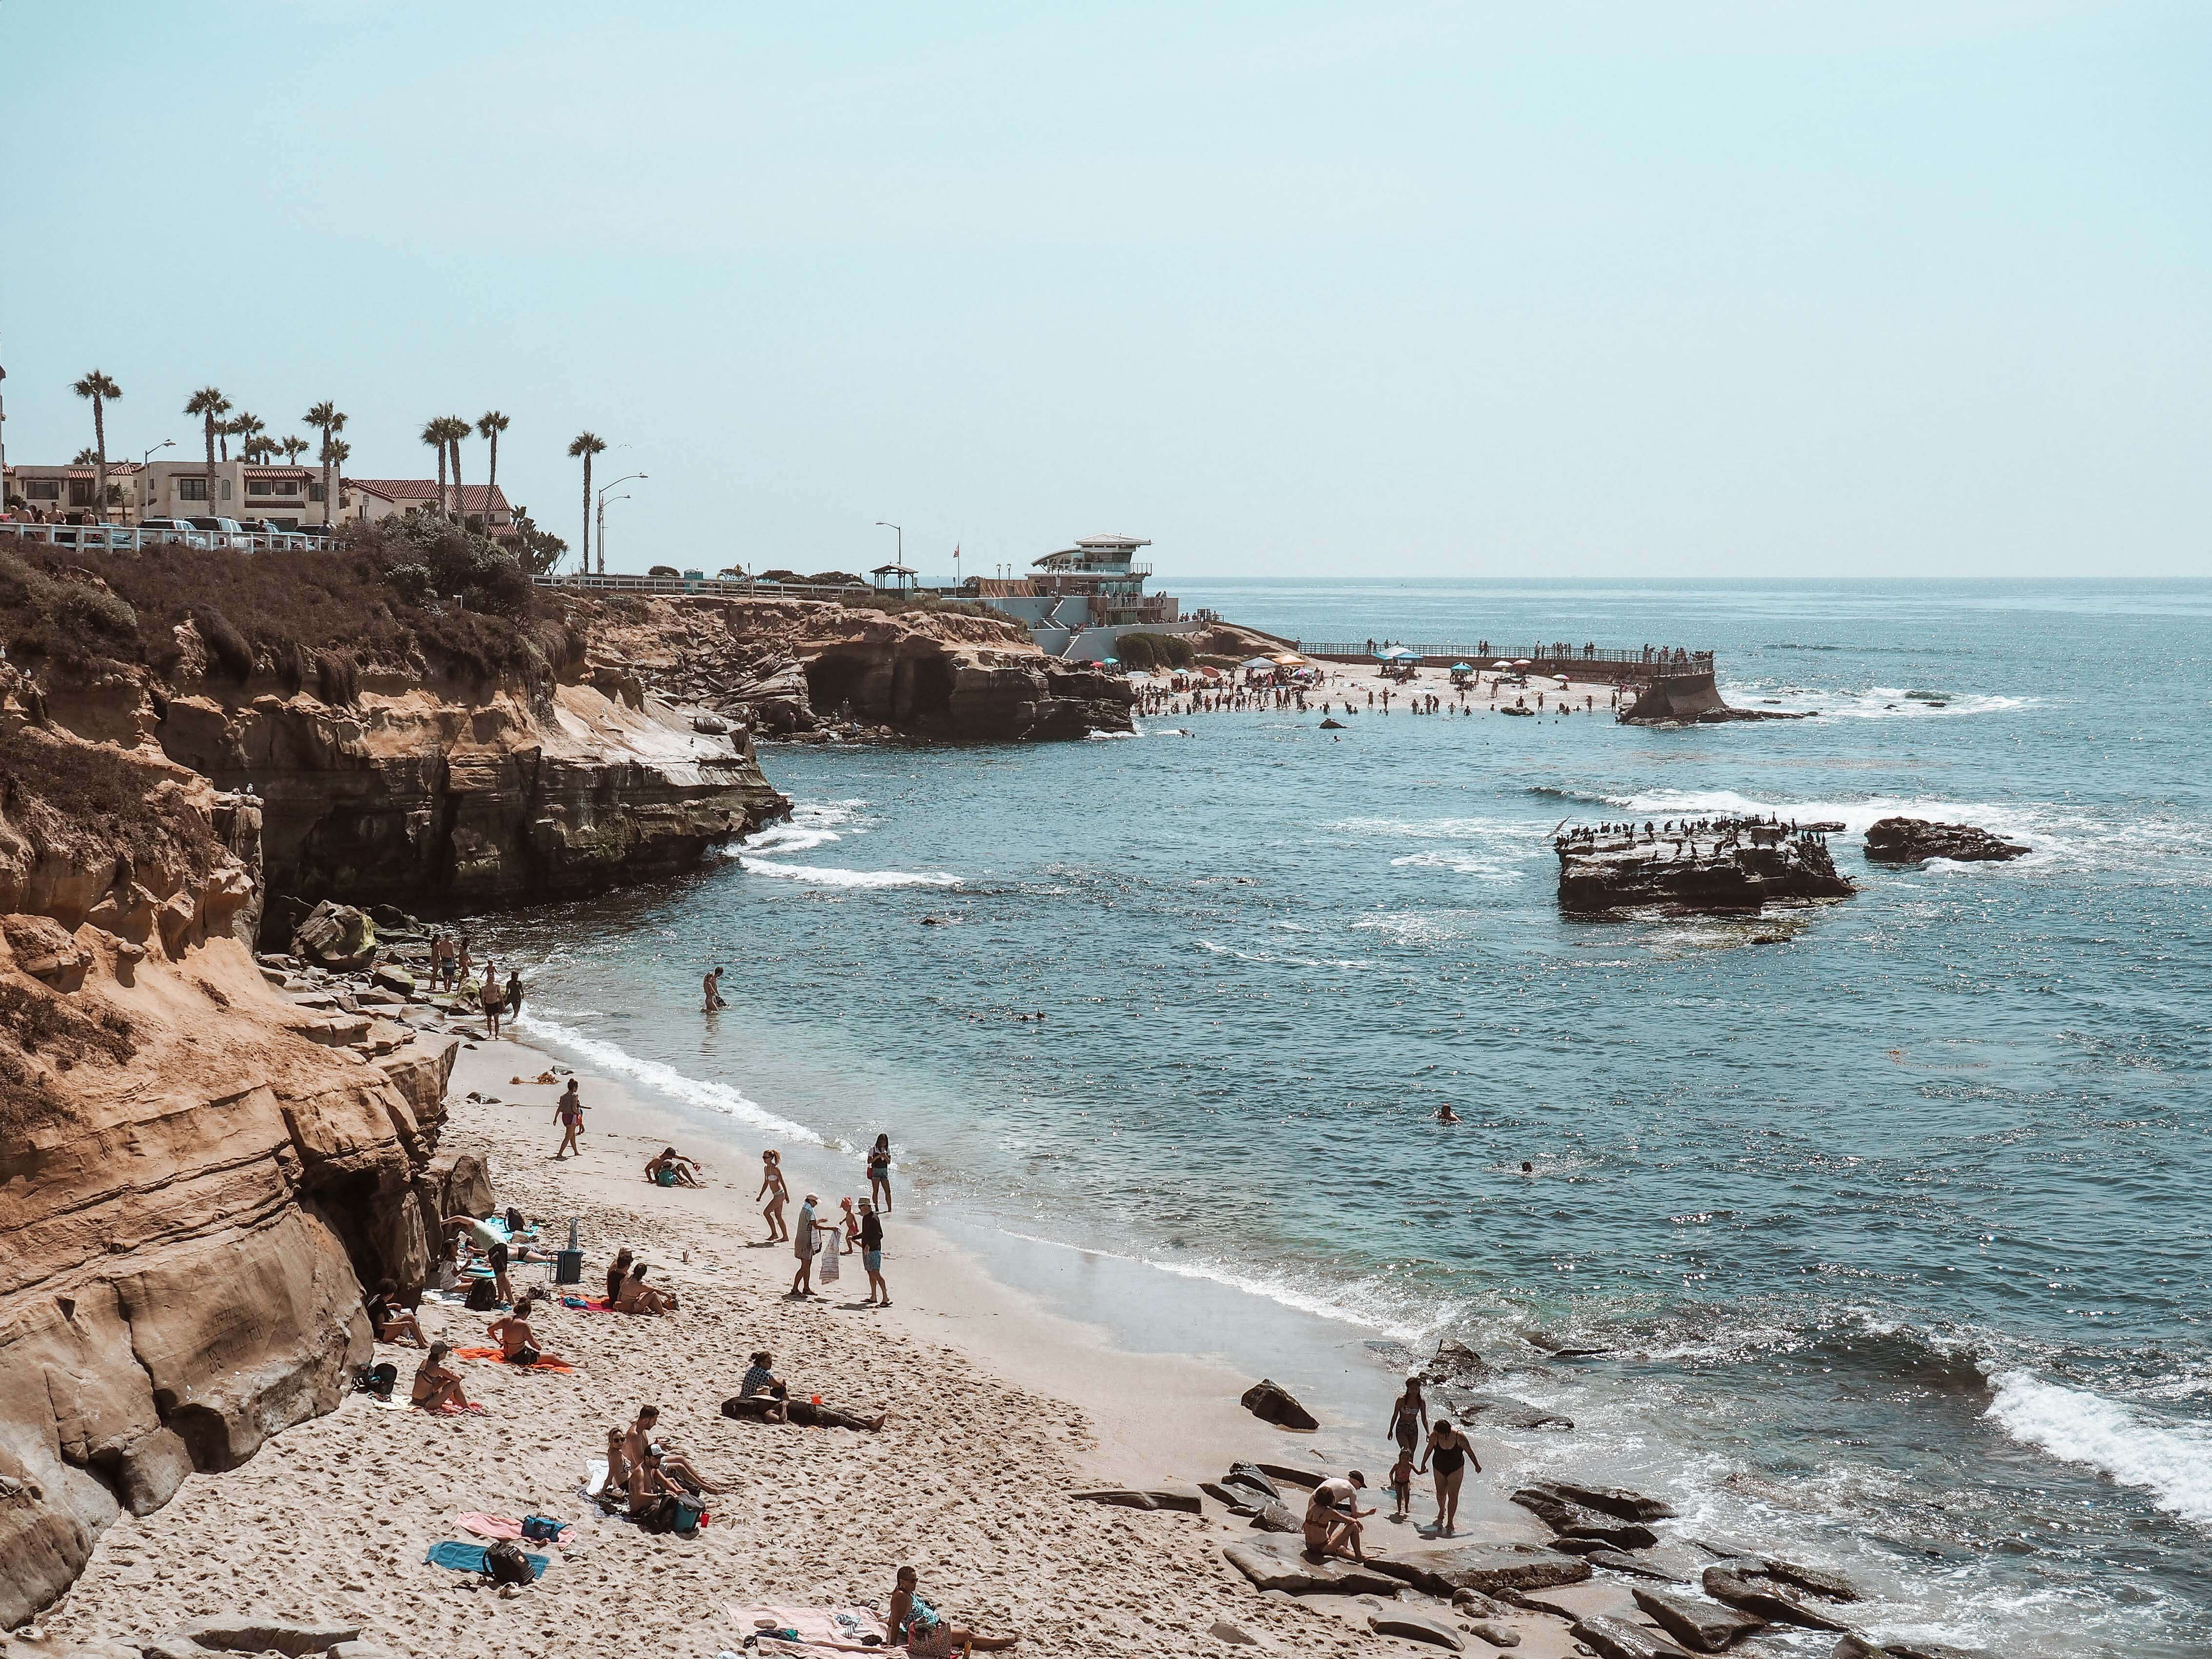 How To Spend A Weekend In San Diego